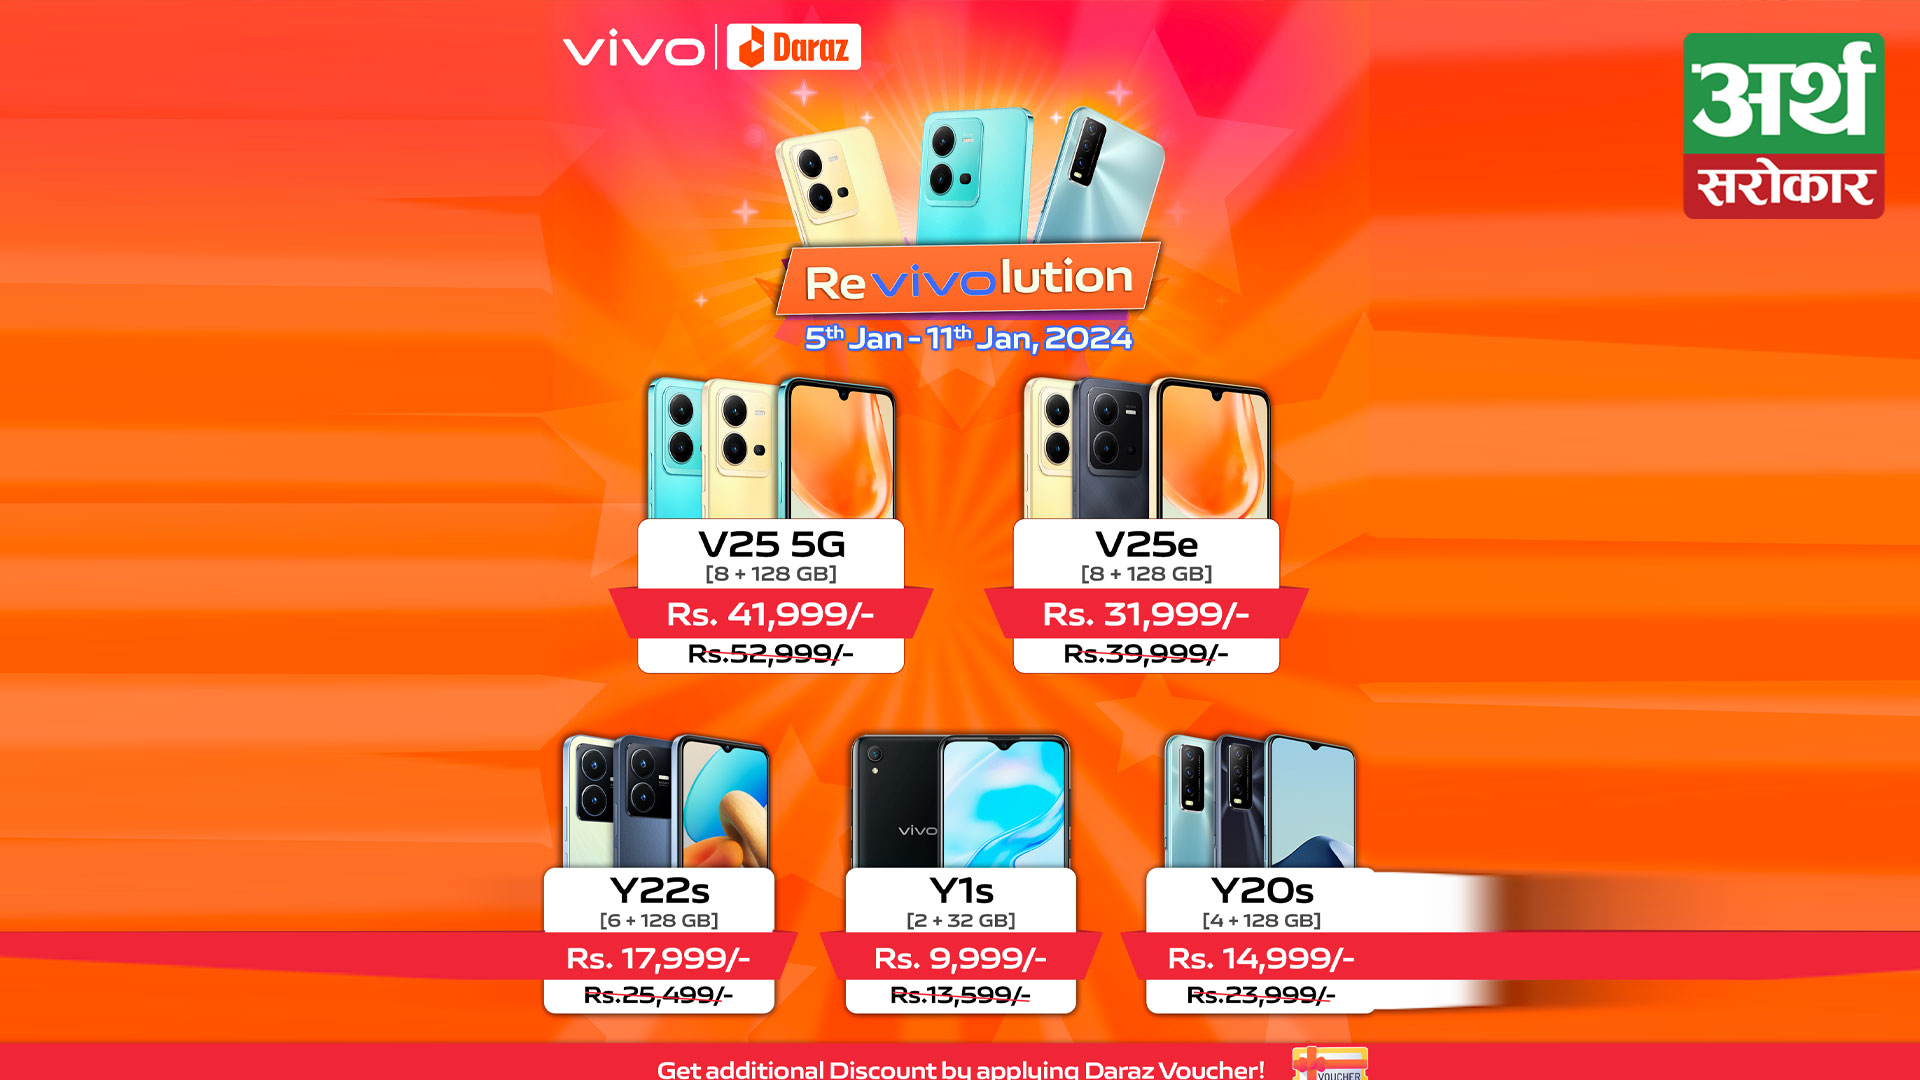 Daraz and Vivo bring New Year special treats to their smartphones!